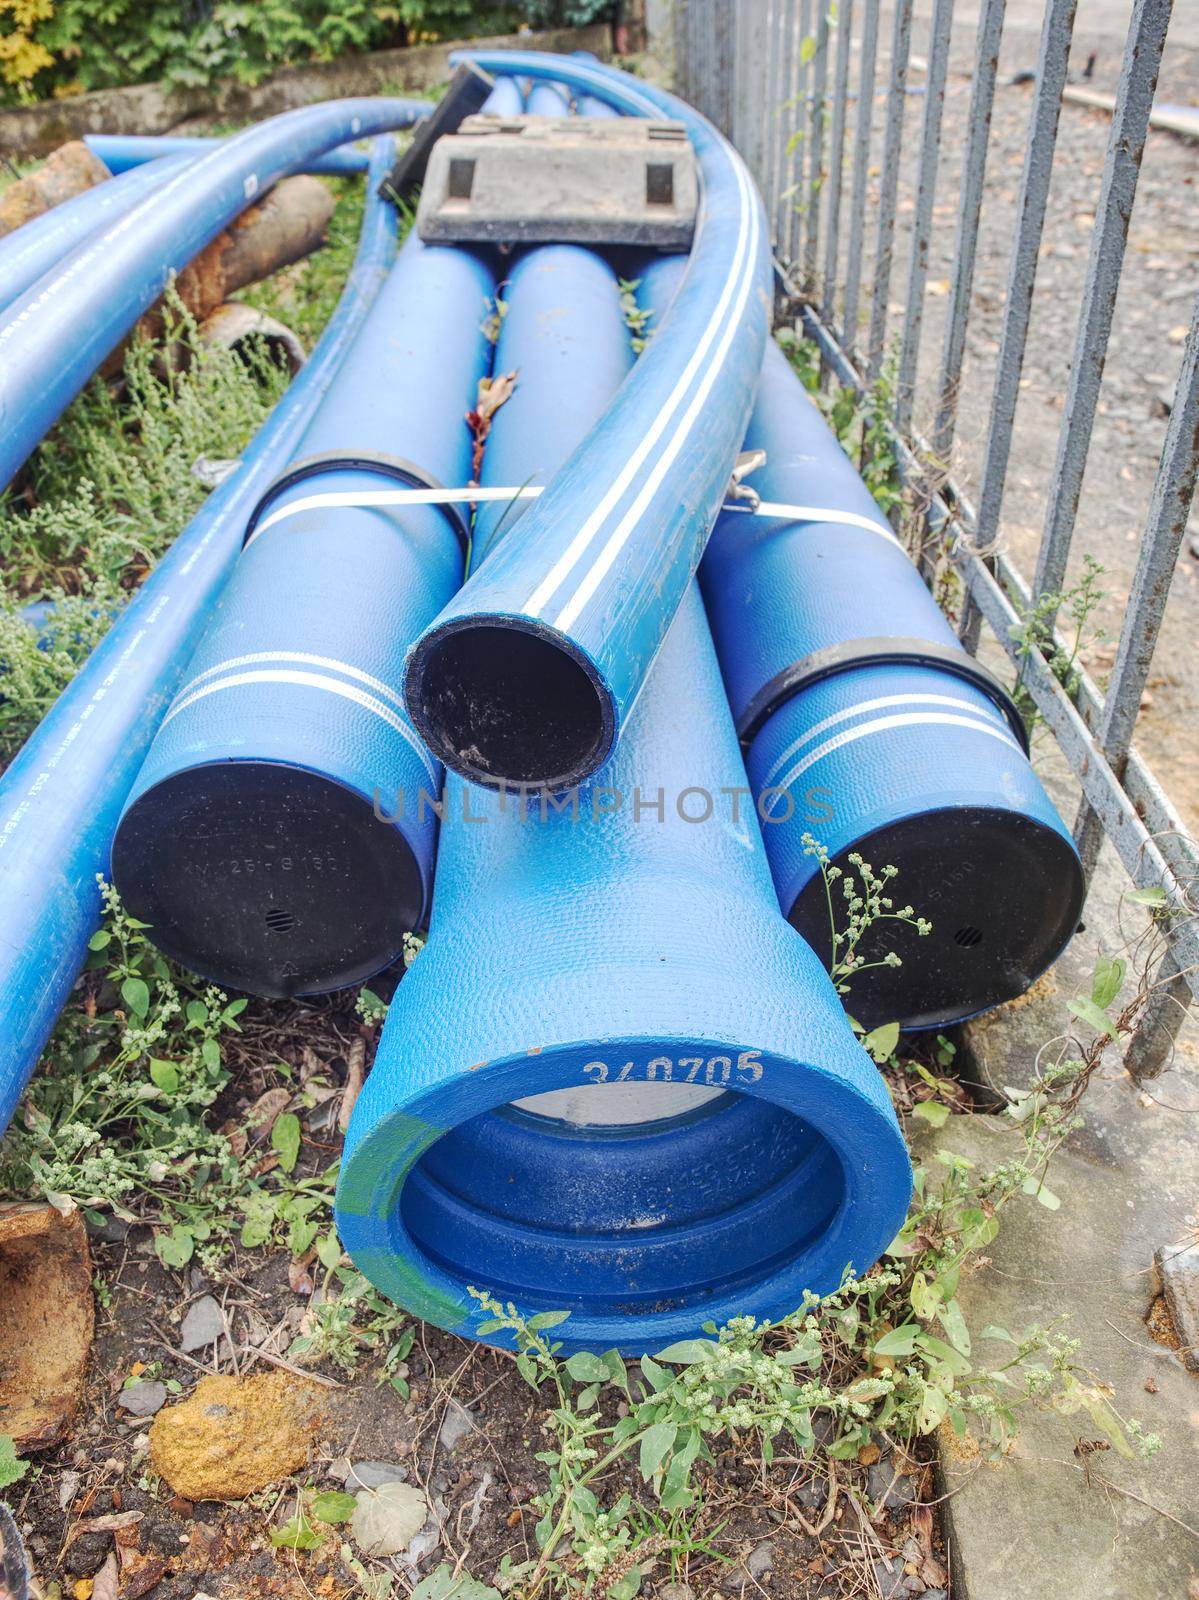 New pipes or tubes. Fluid conveyance. Pipeline construction by rdonar2